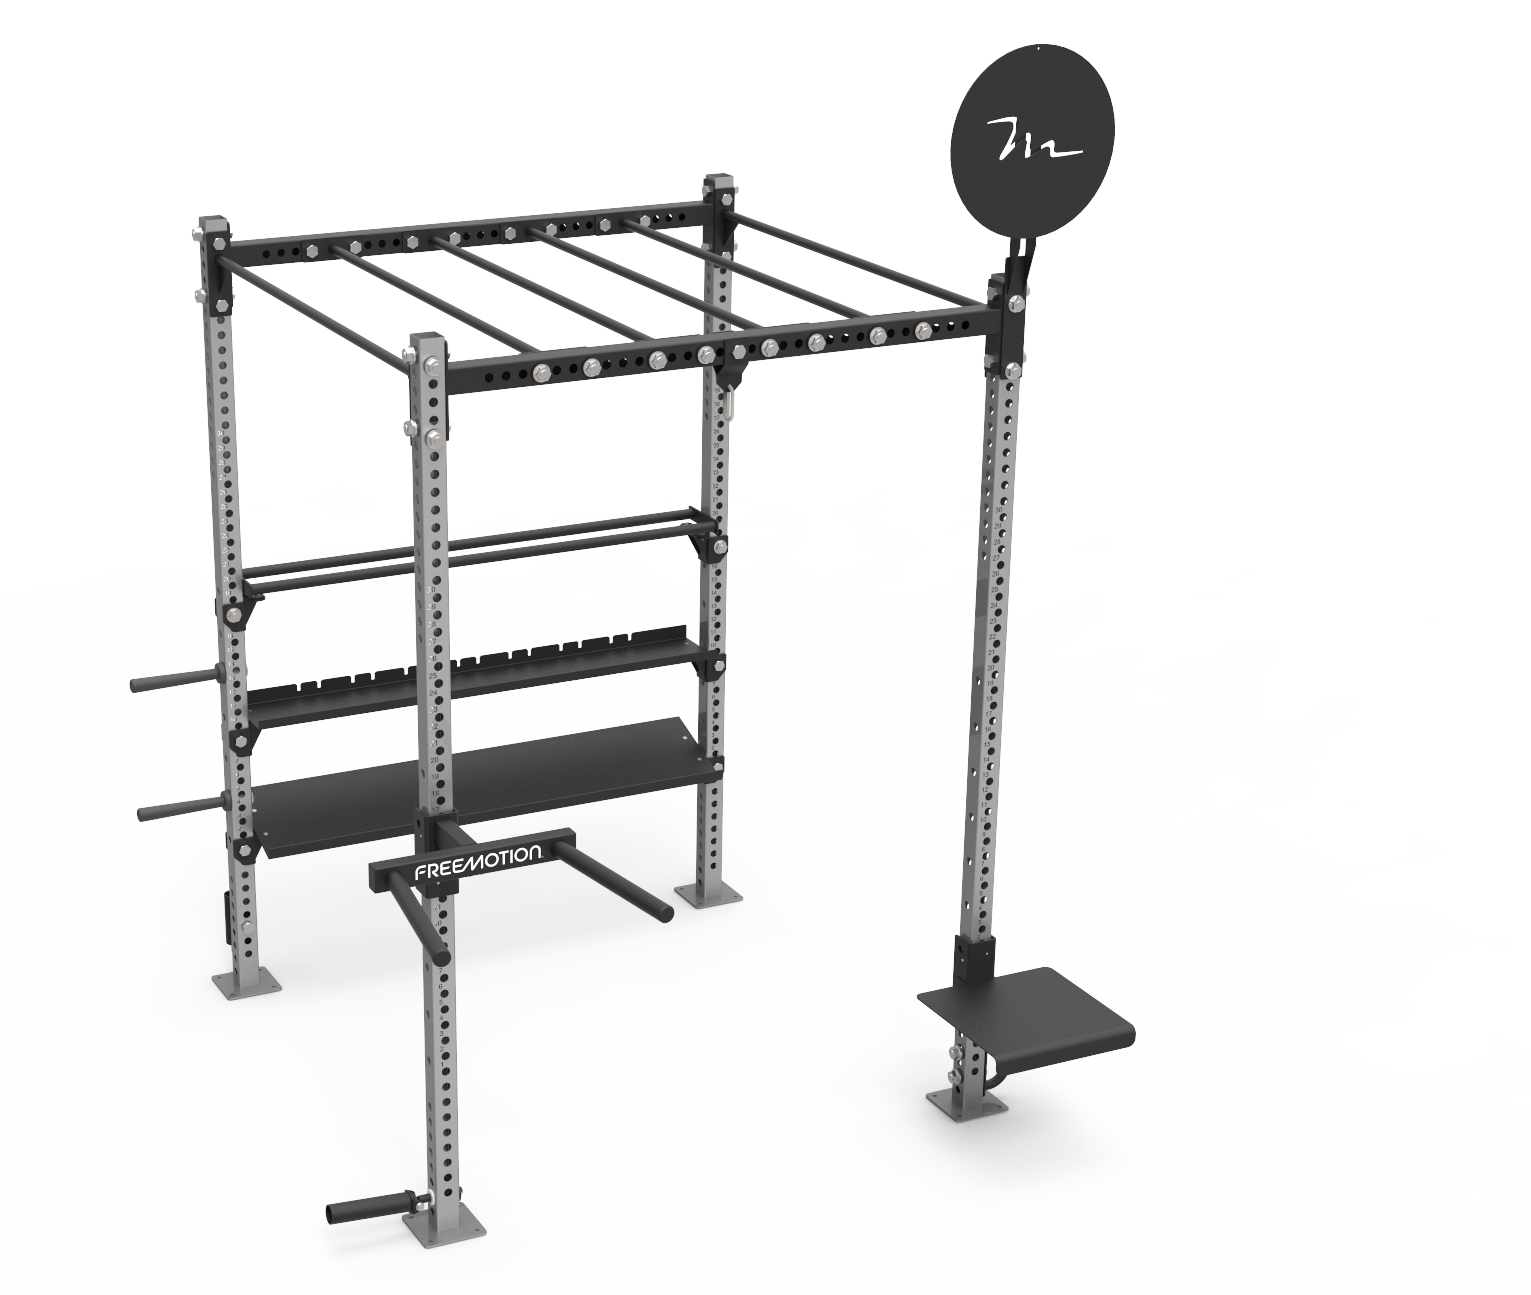 Preconfigured 20' Incline Monkey Bar Rig With Accessories